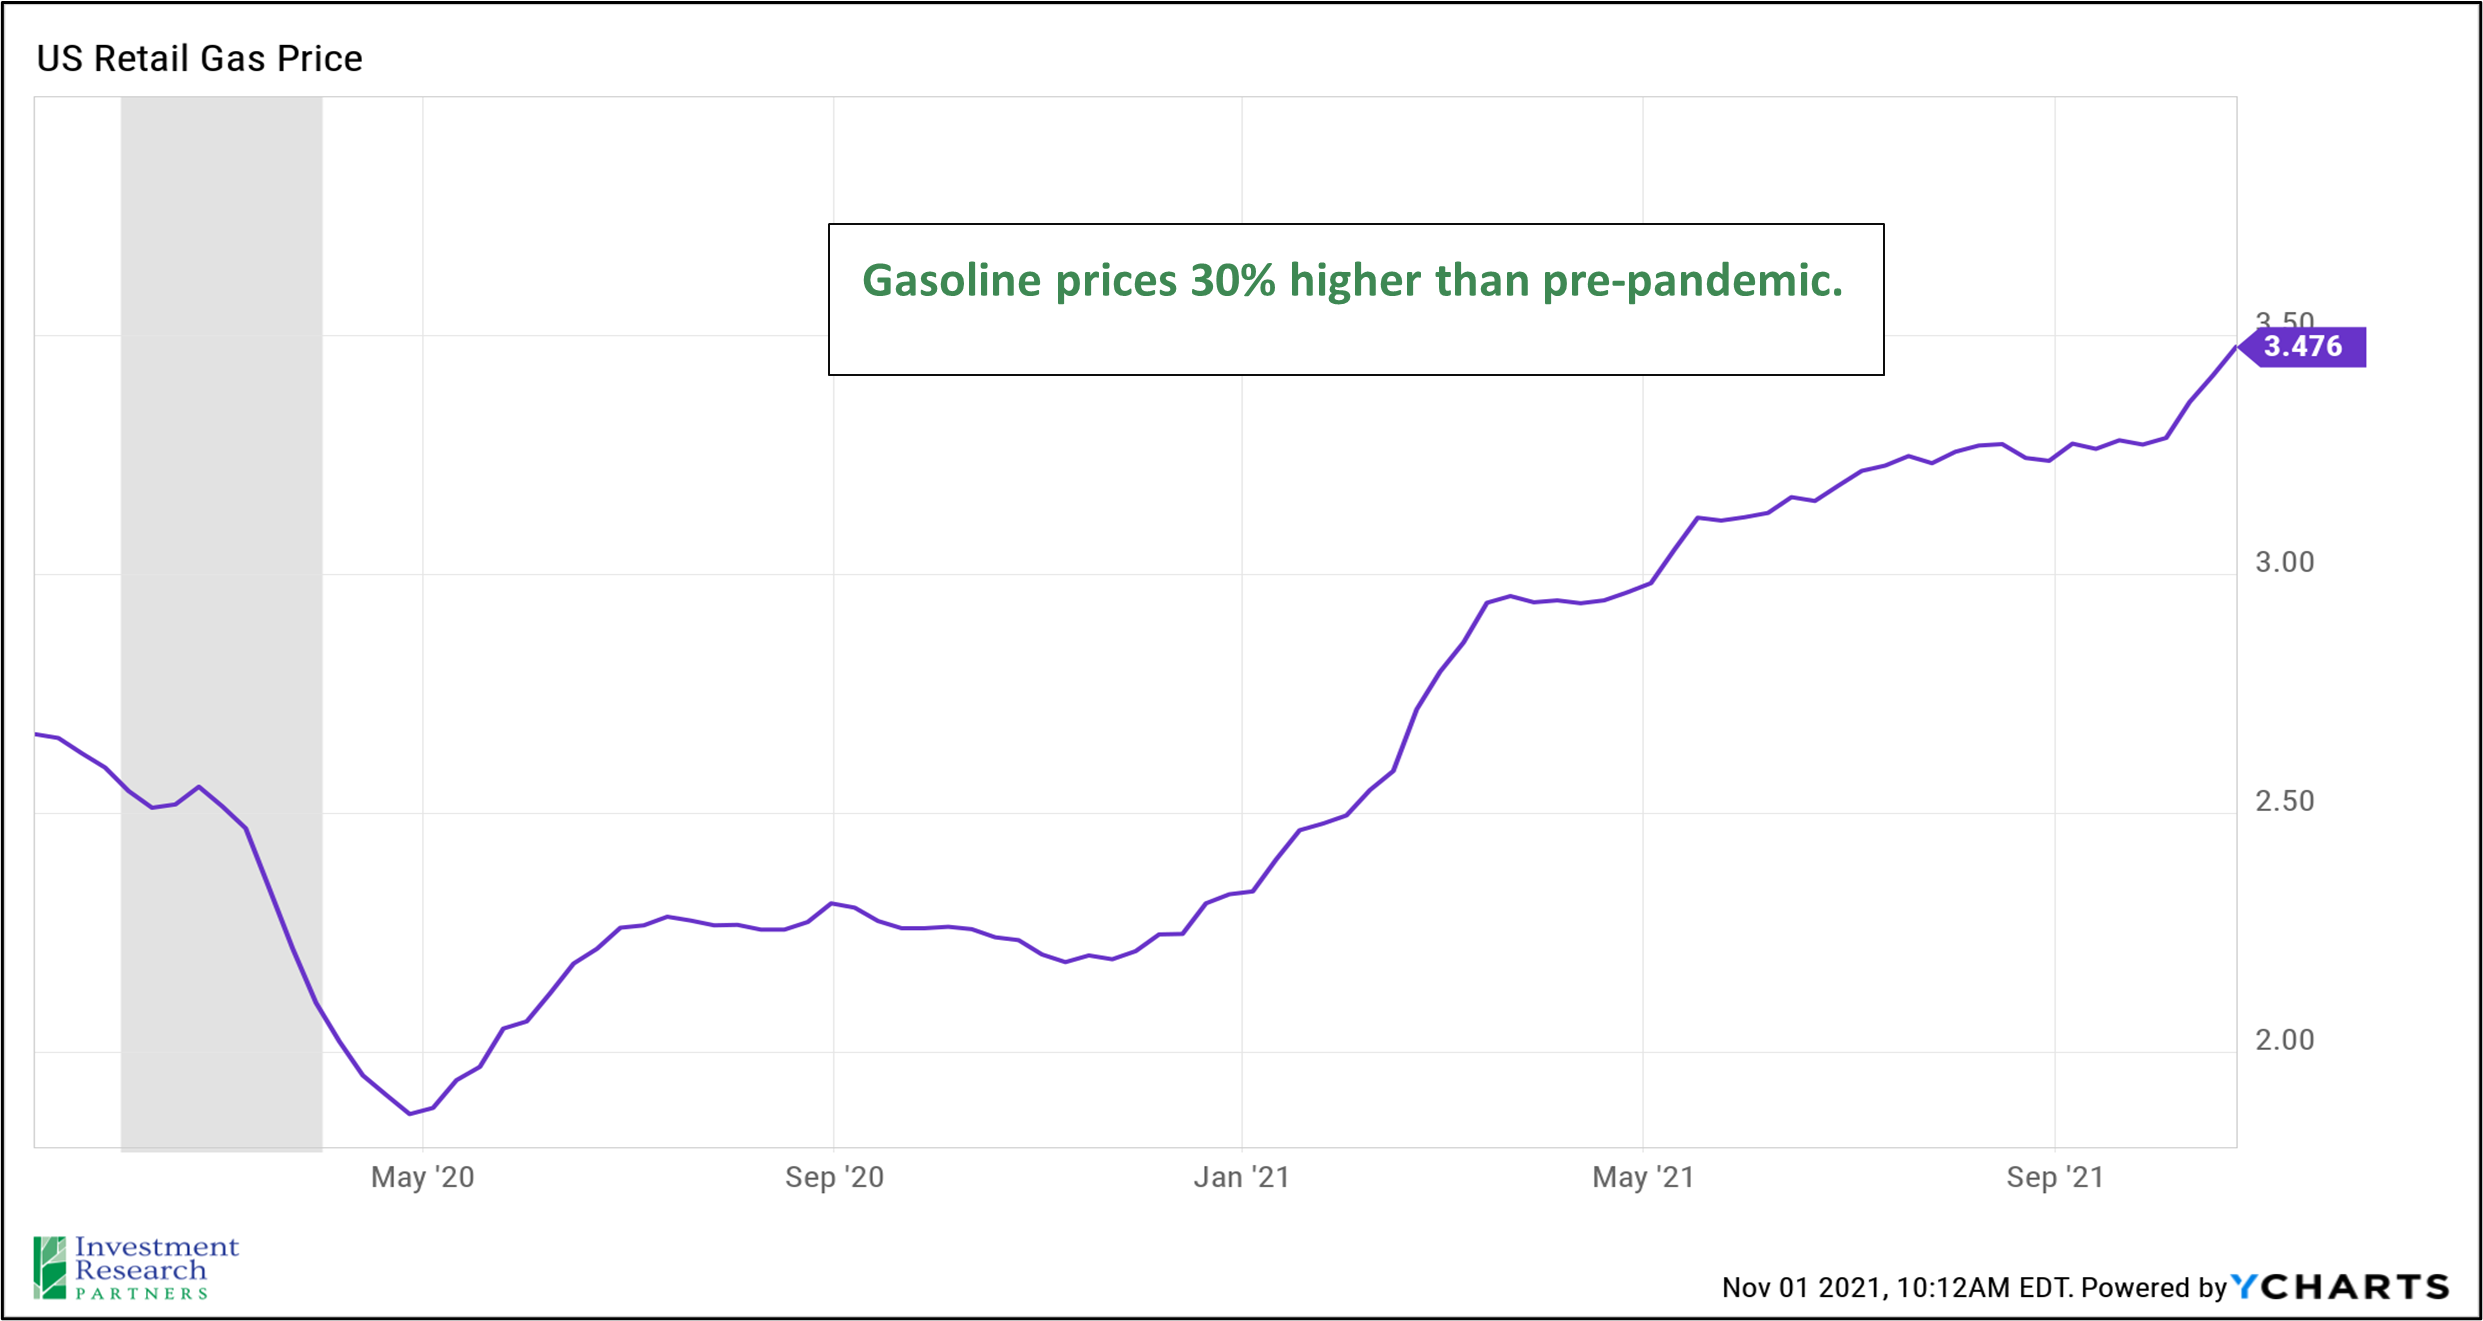 Line graph depicting US Retail Gas Price from May 2020 to September 2021 with text that reads: Gasoline prices 30% higher than pre-pandemic.